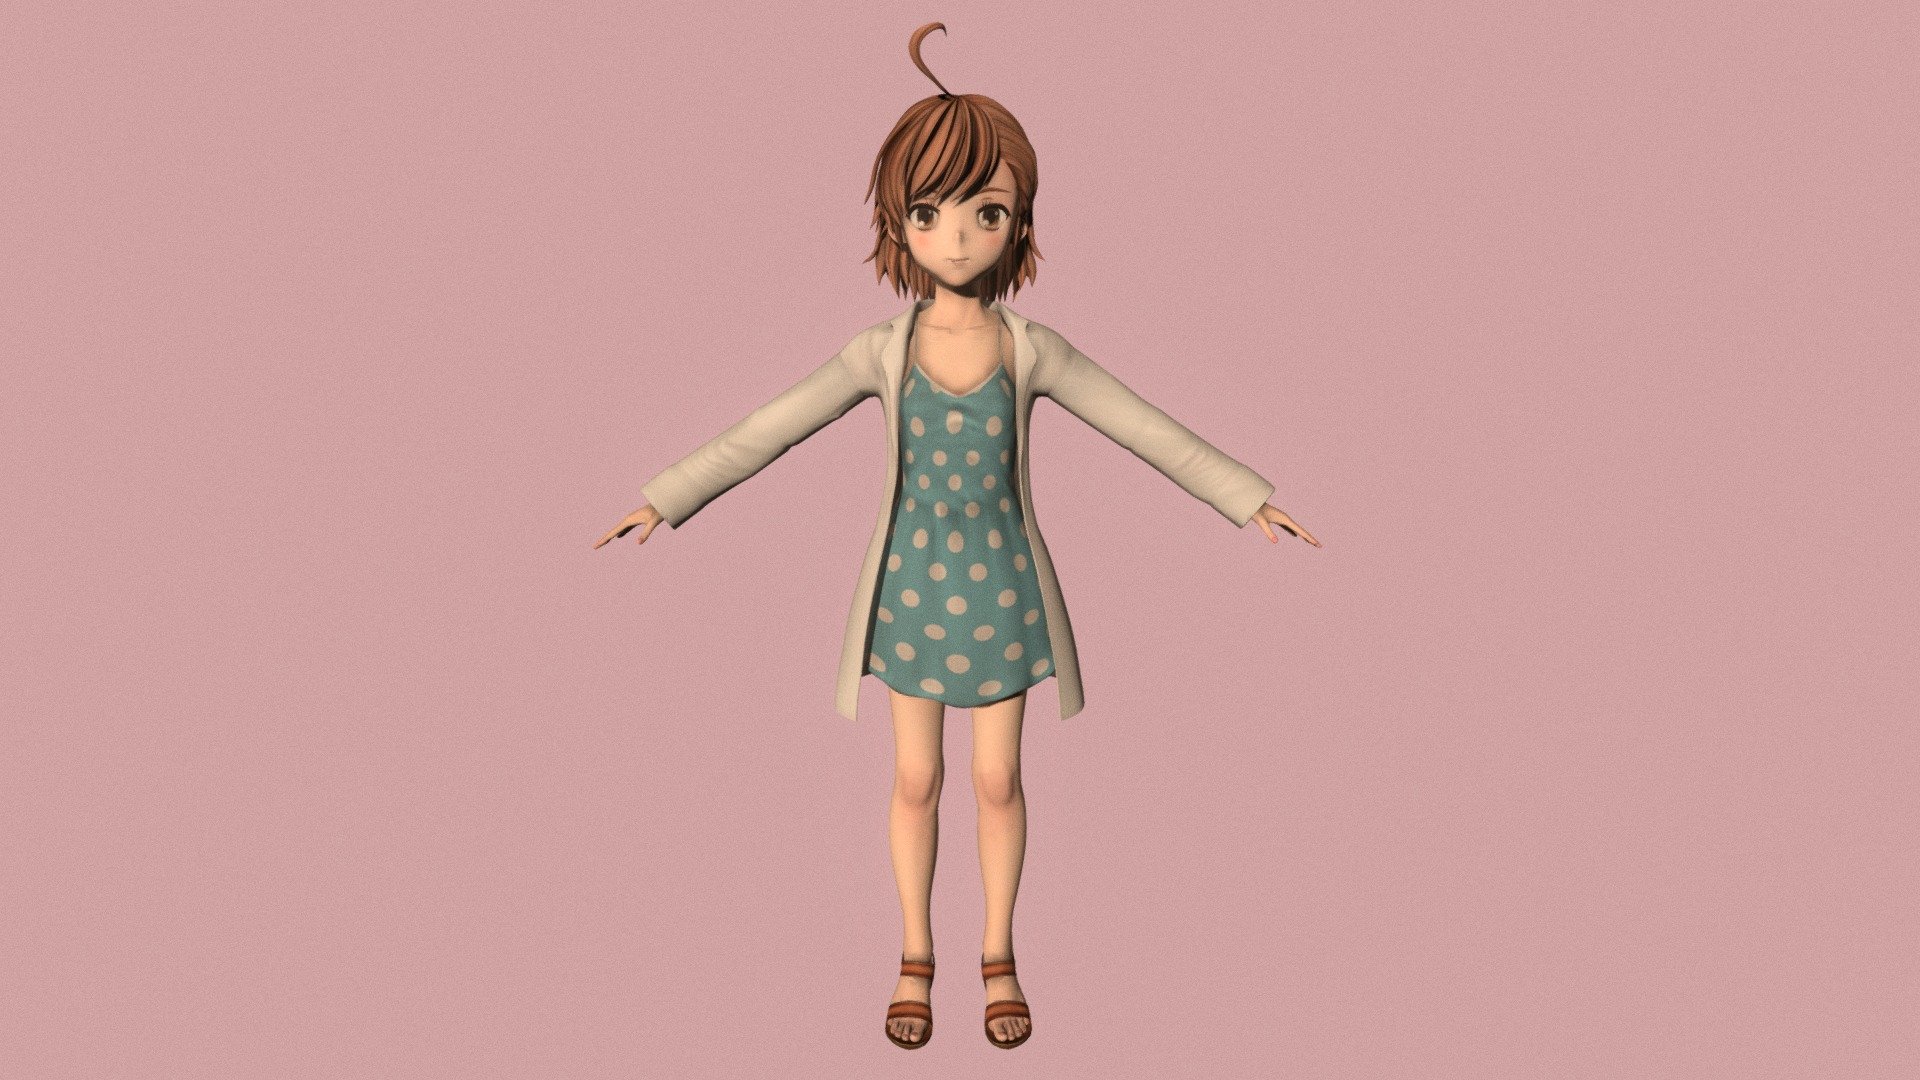 T-pose rigged model of anime girl Last Order (A Certain Scientific Railgun).

Body and clothings are rigged and skinned by 3ds Max CAT system.

Eye direction and facial animation controlled by Morpher modifier / Shape Keys / Blendshape.

This product include .FBX (ver. 7200) and .MAX (ver. 2010) files.

3ds Max version is turbosmoothed to give a high quality render (as you can see here).

Original main body mesh have ~7.000 polys.

This 3D model may need some tweaking to adapt the rig system to games engine and other platforms.

I support convert model to various file formats (the rig data will be lost in this process): 3DS; AI; ASE; DAE; DWF; DWG; DXF; FLT; HTR; IGS; M3G; MQO; OBJ; SAT; STL; W3D; WRL; X.

You can buy all of my models in one pack to save cost: https://sketchfab.com/3d-models/all-of-my-anime-girls-c5a56156994e4193b9e8fa21a3b8360b

And I can make commission models.

If you have any questions, please leave a comment or contact me via my email 3d.eden.project@gmail.com 3d model